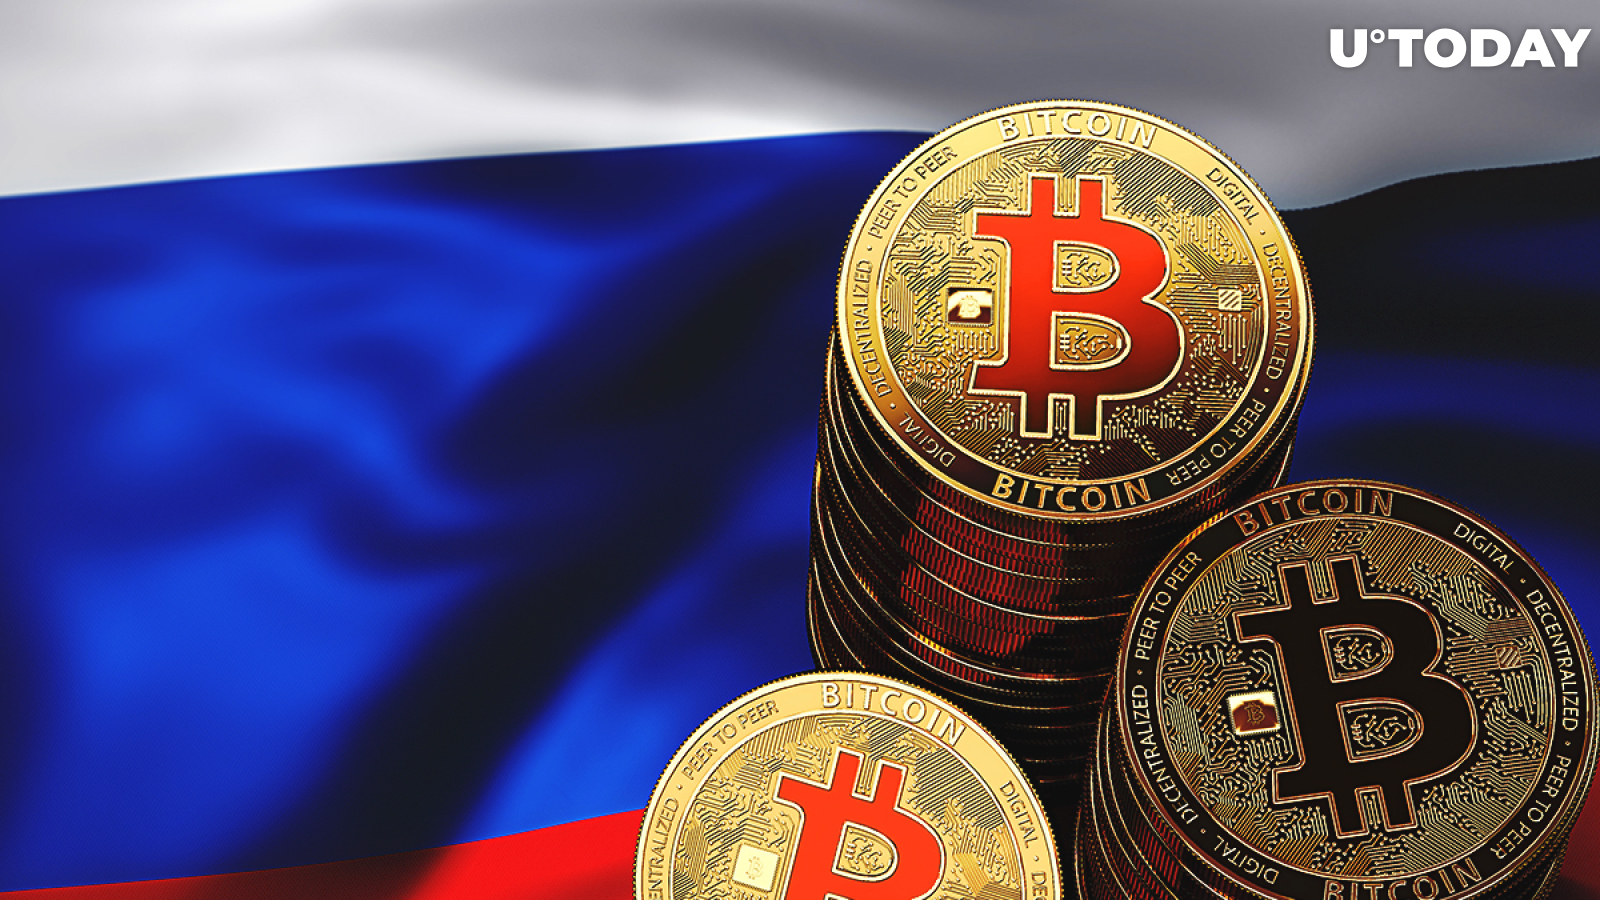 Russian Government Officials Have to Declare Cryptocurrency Savings While Cases of BTC Bribes Are Being Reported